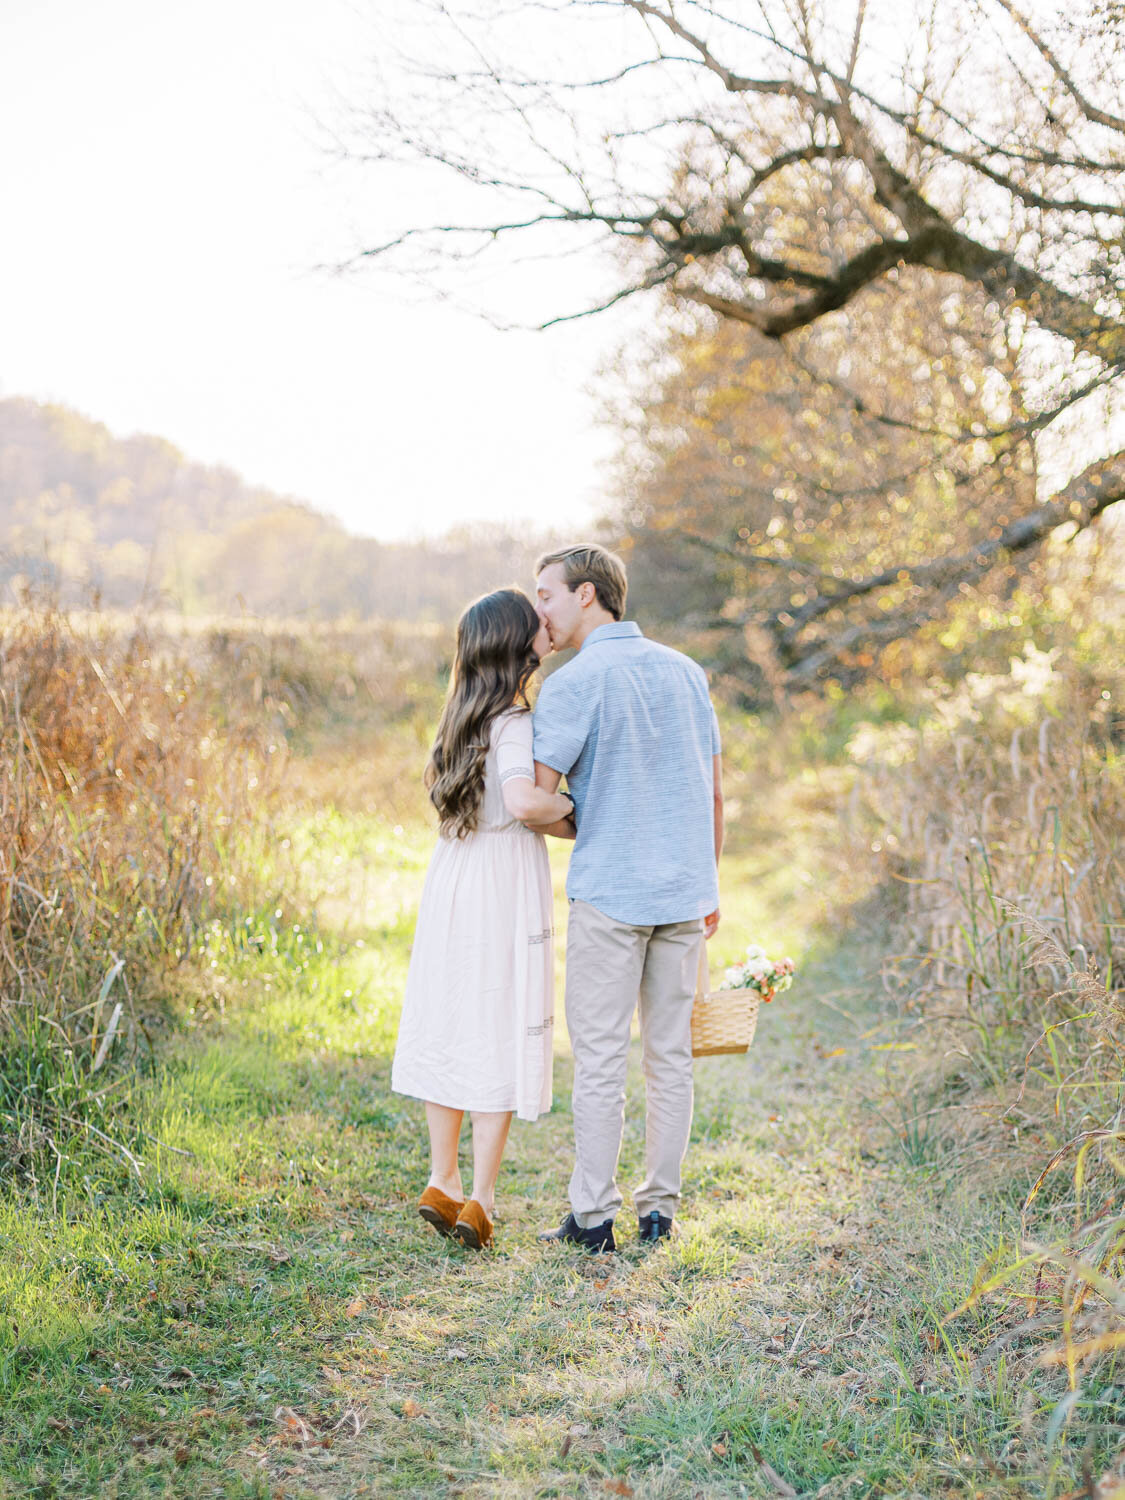 woman-kisses-her-fiance-on-the-lips-as-they-walk-down-a-path-during-their-fall-engagement-session-in-virginia.jpg